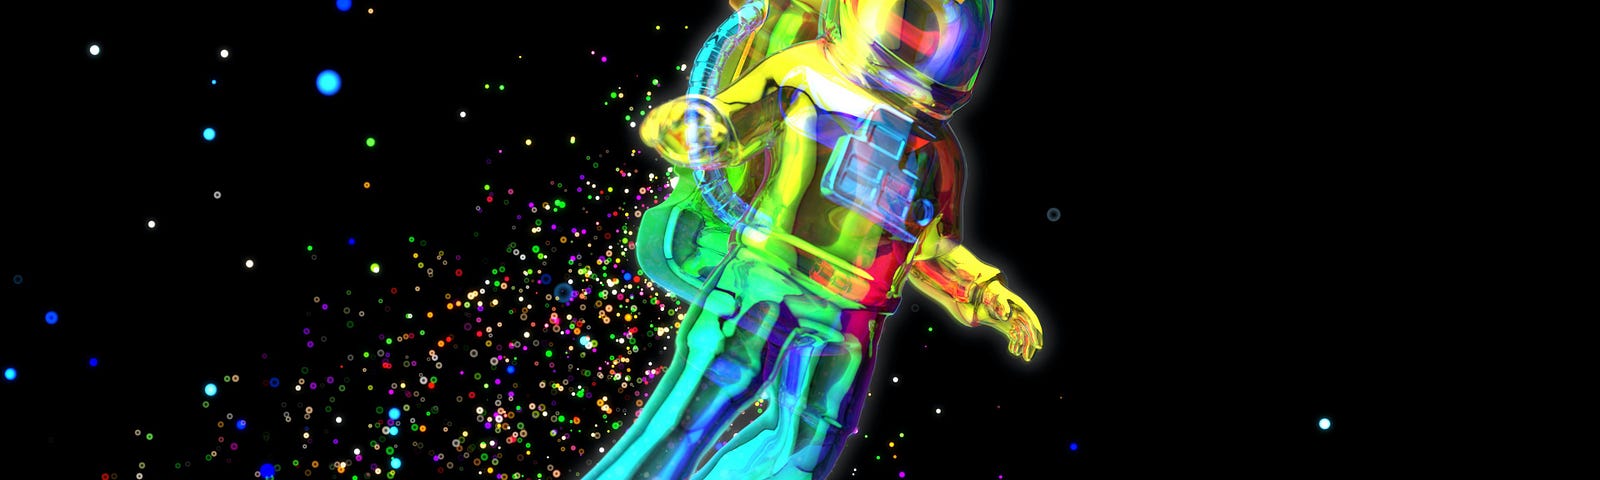 Painting of colorful astronaut floating in deep space untethered.